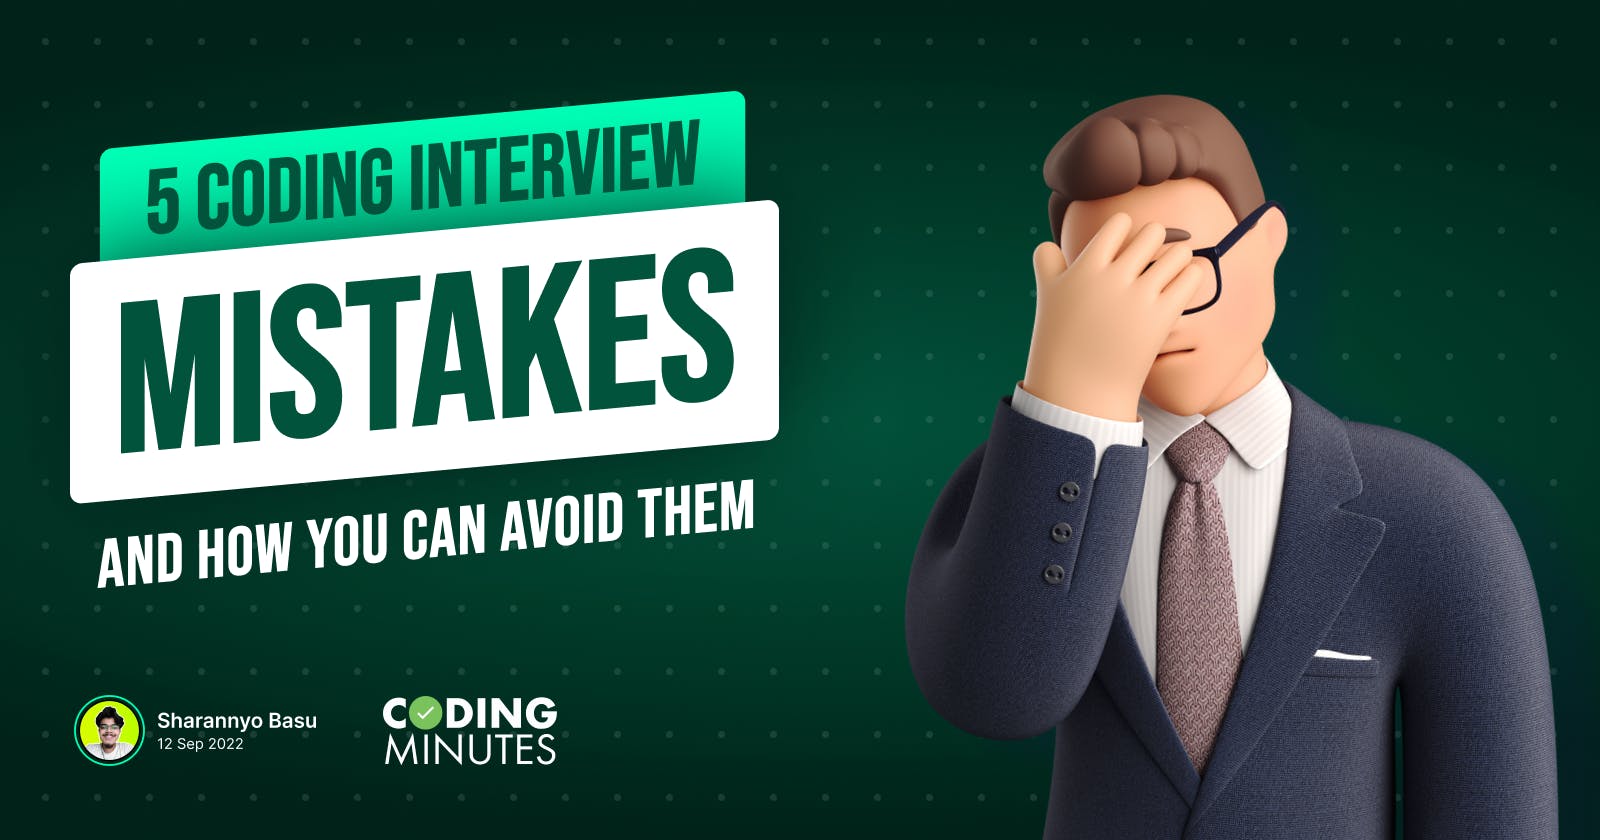 5 Mistakes I Made During a Coding Interview - How You Can Avoid Them